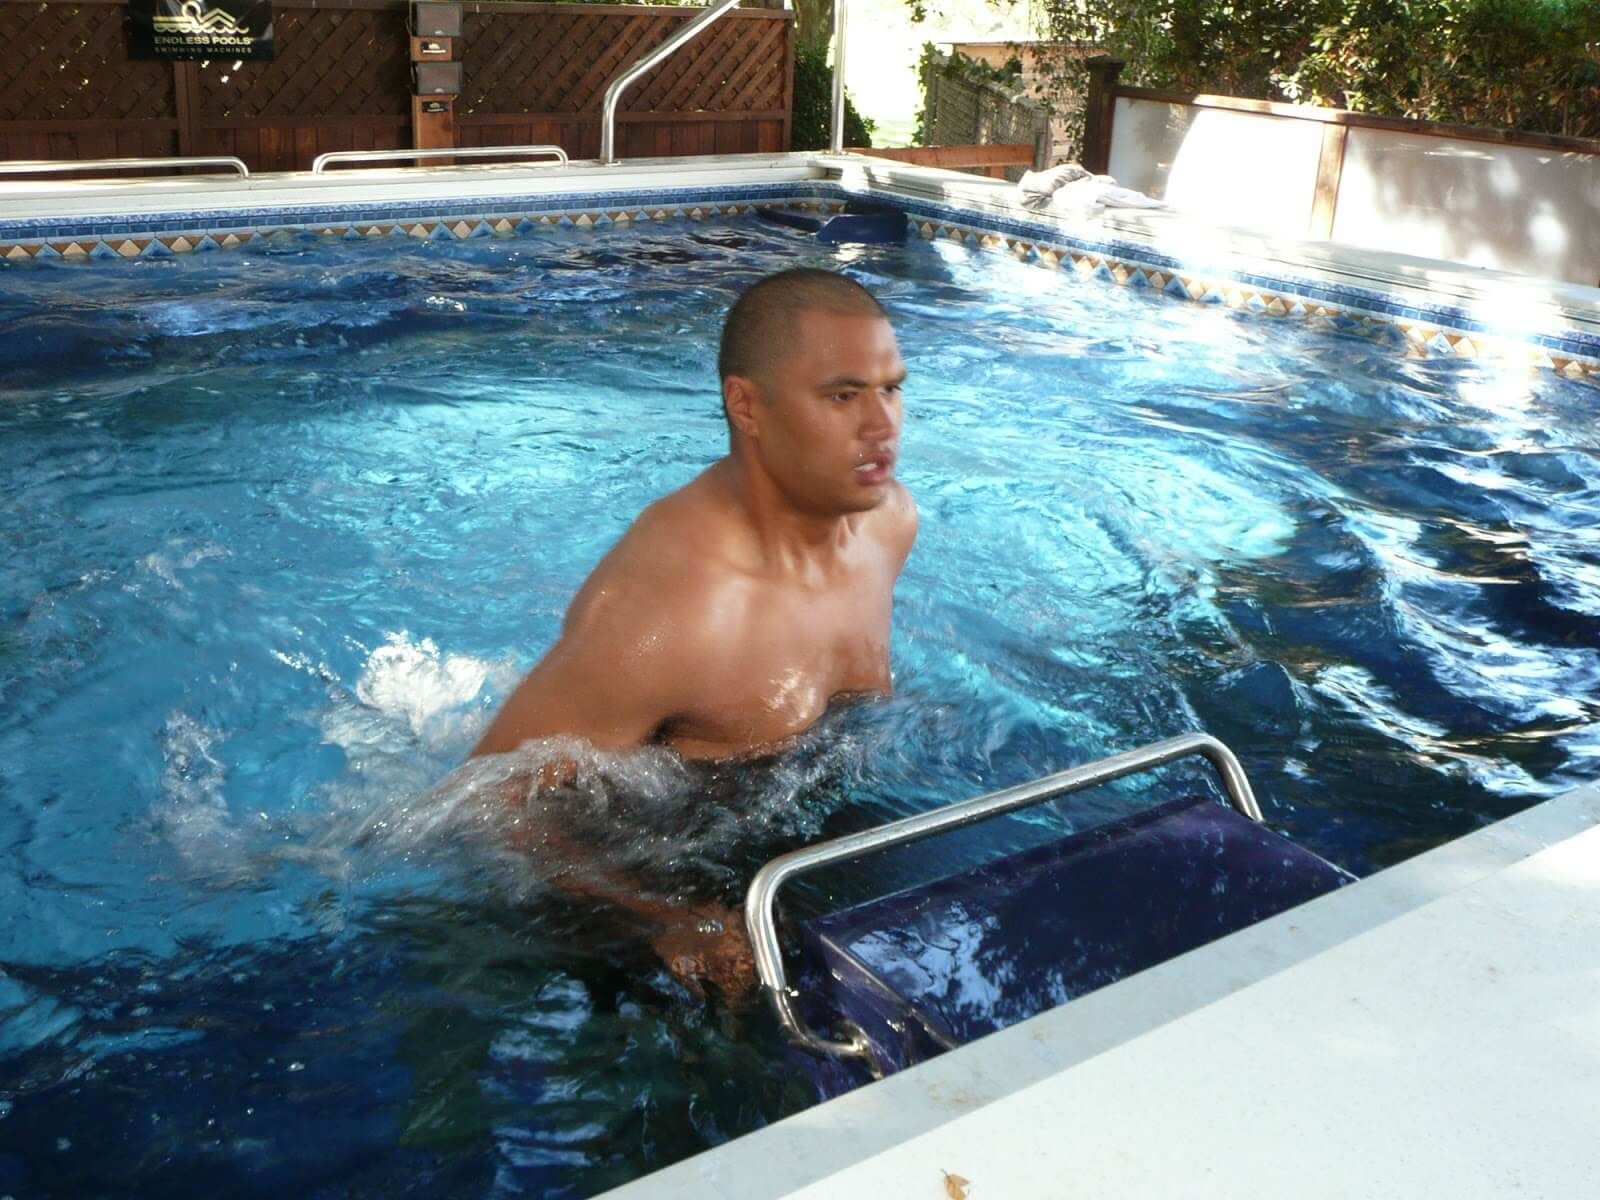 Sam from The Biggest Loser, Season 9, using the Endless Pools Underwater Treadmill